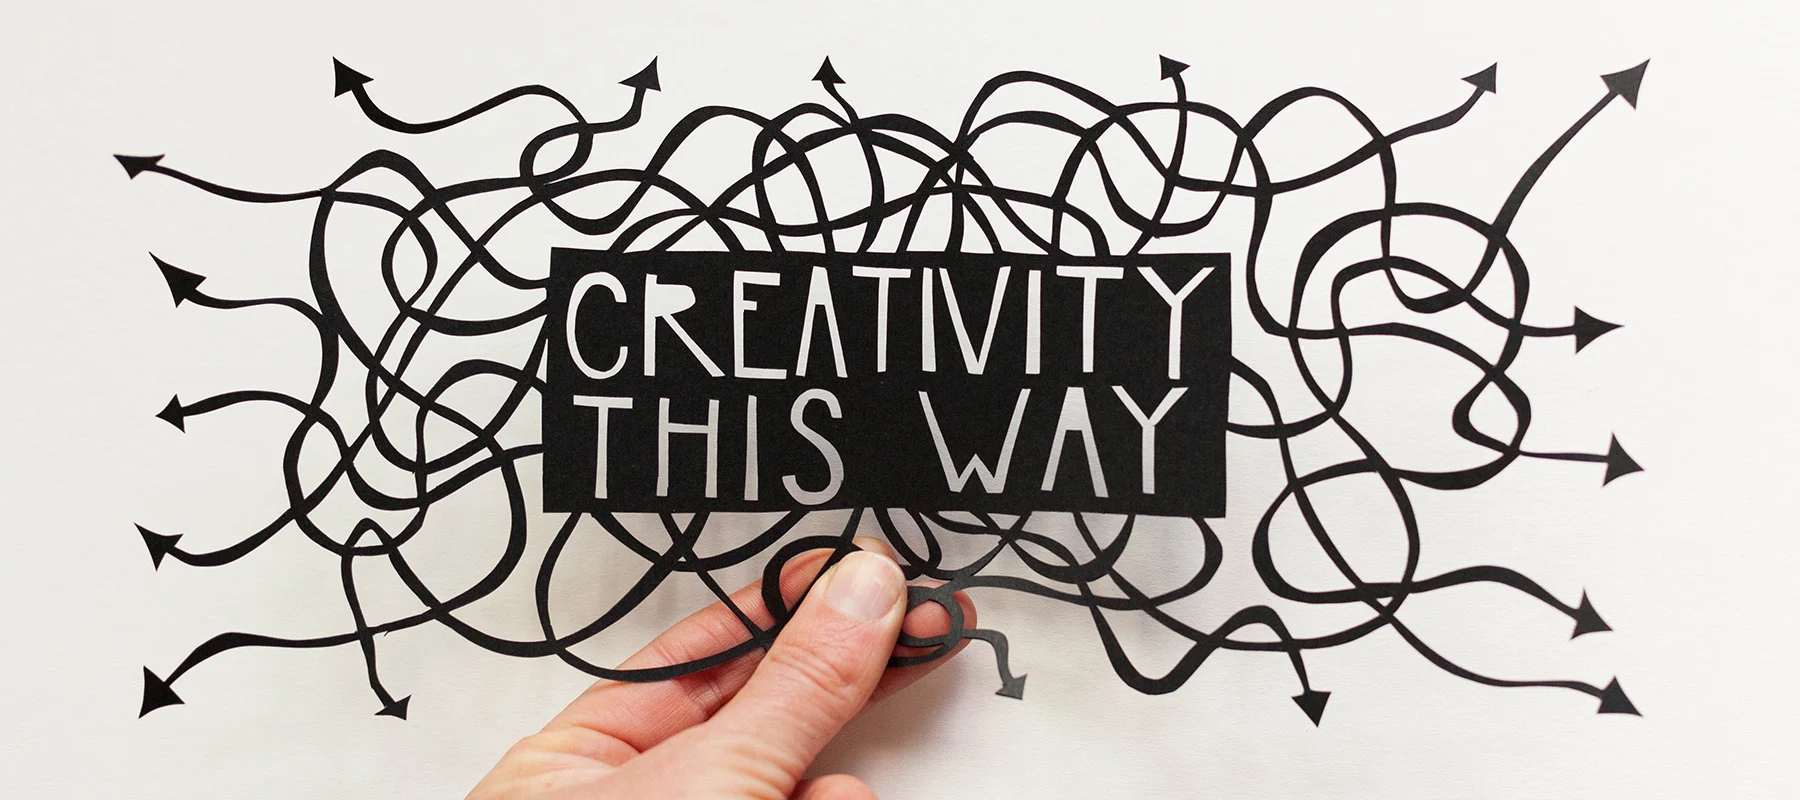 Everyone is Creative: How to Build Your Own Creativity Roadmap